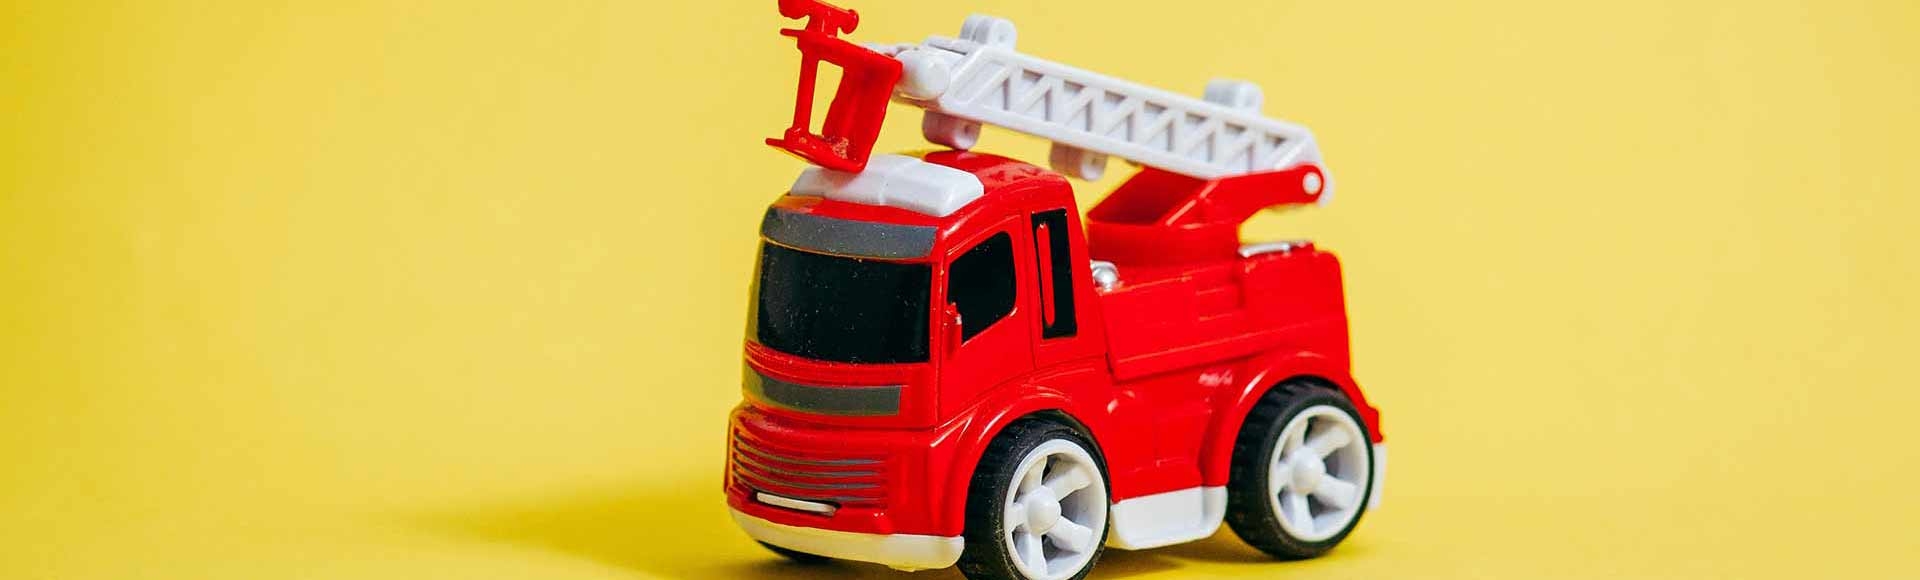 toy red fire engine